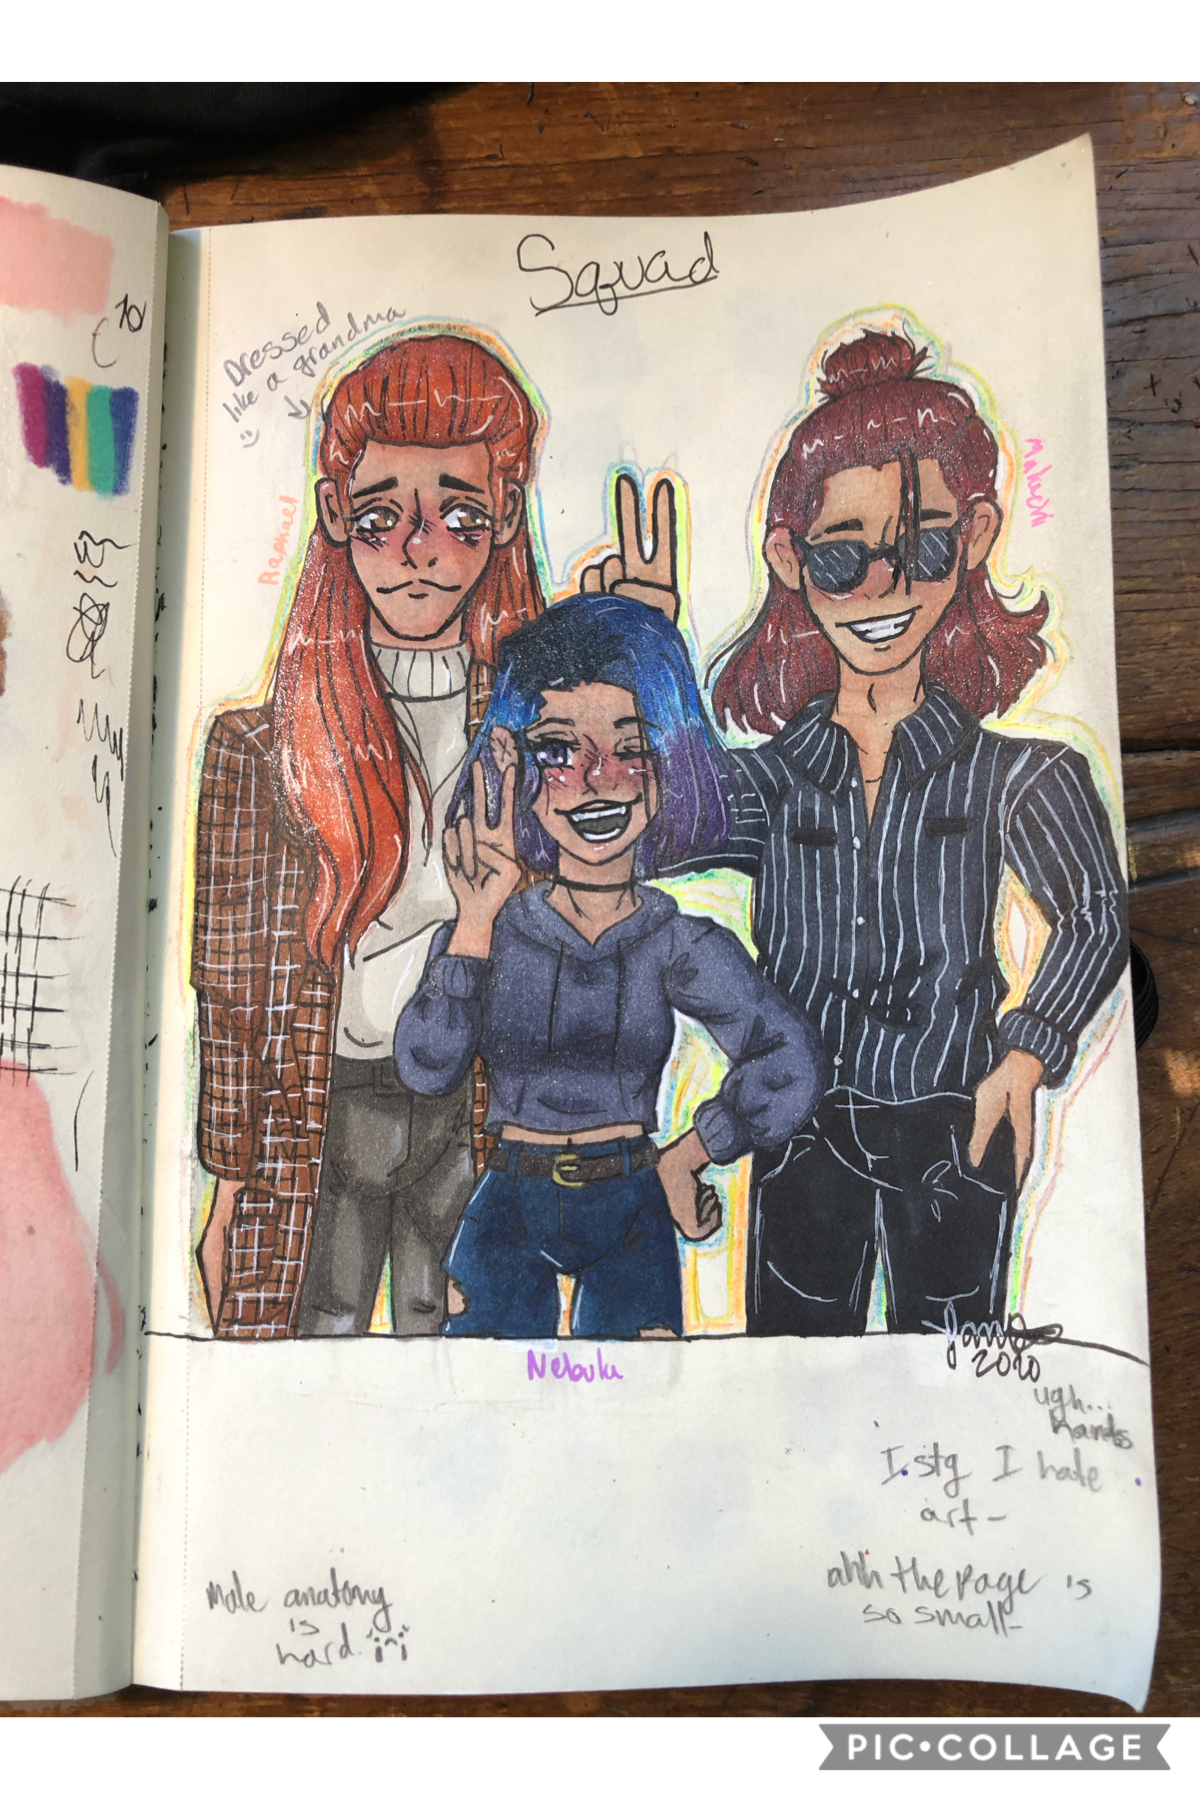 Tehe here’s a drawing I did of my and Elisza’s ocs :) the two guys, Malachi and Raphael, are her ocs and the girl, Nebula, is my oc :)))